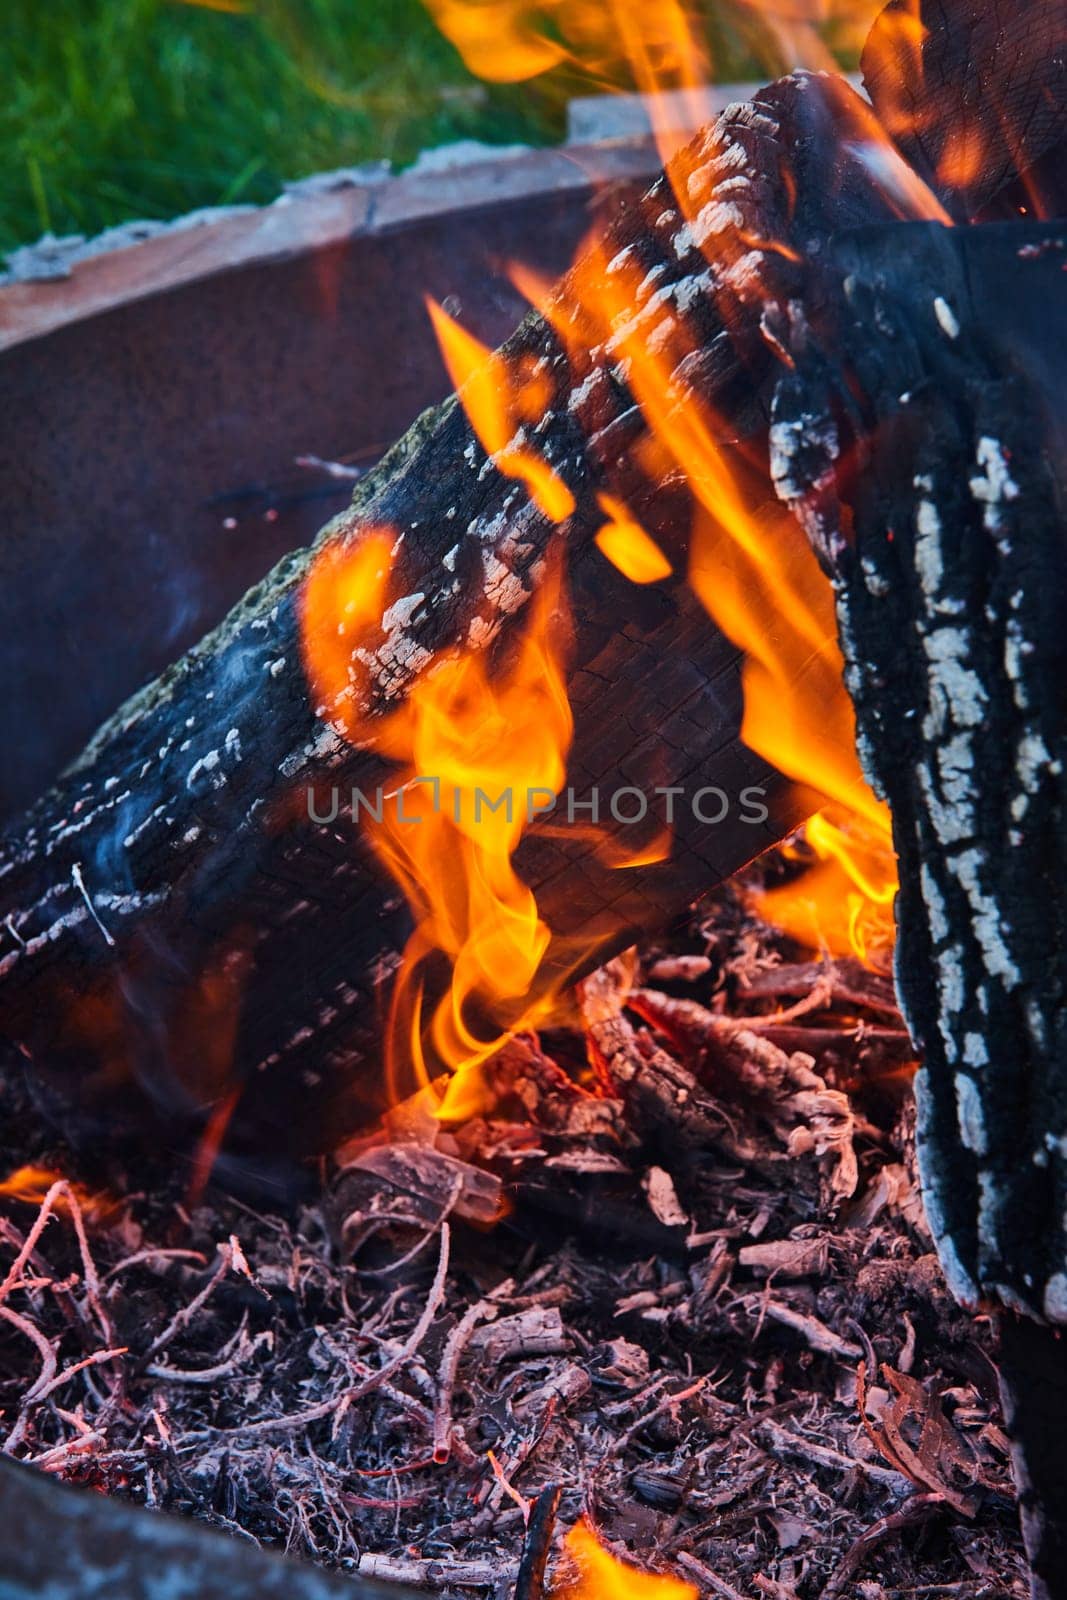 Image of Burning logs in fire pit with curled white twigs